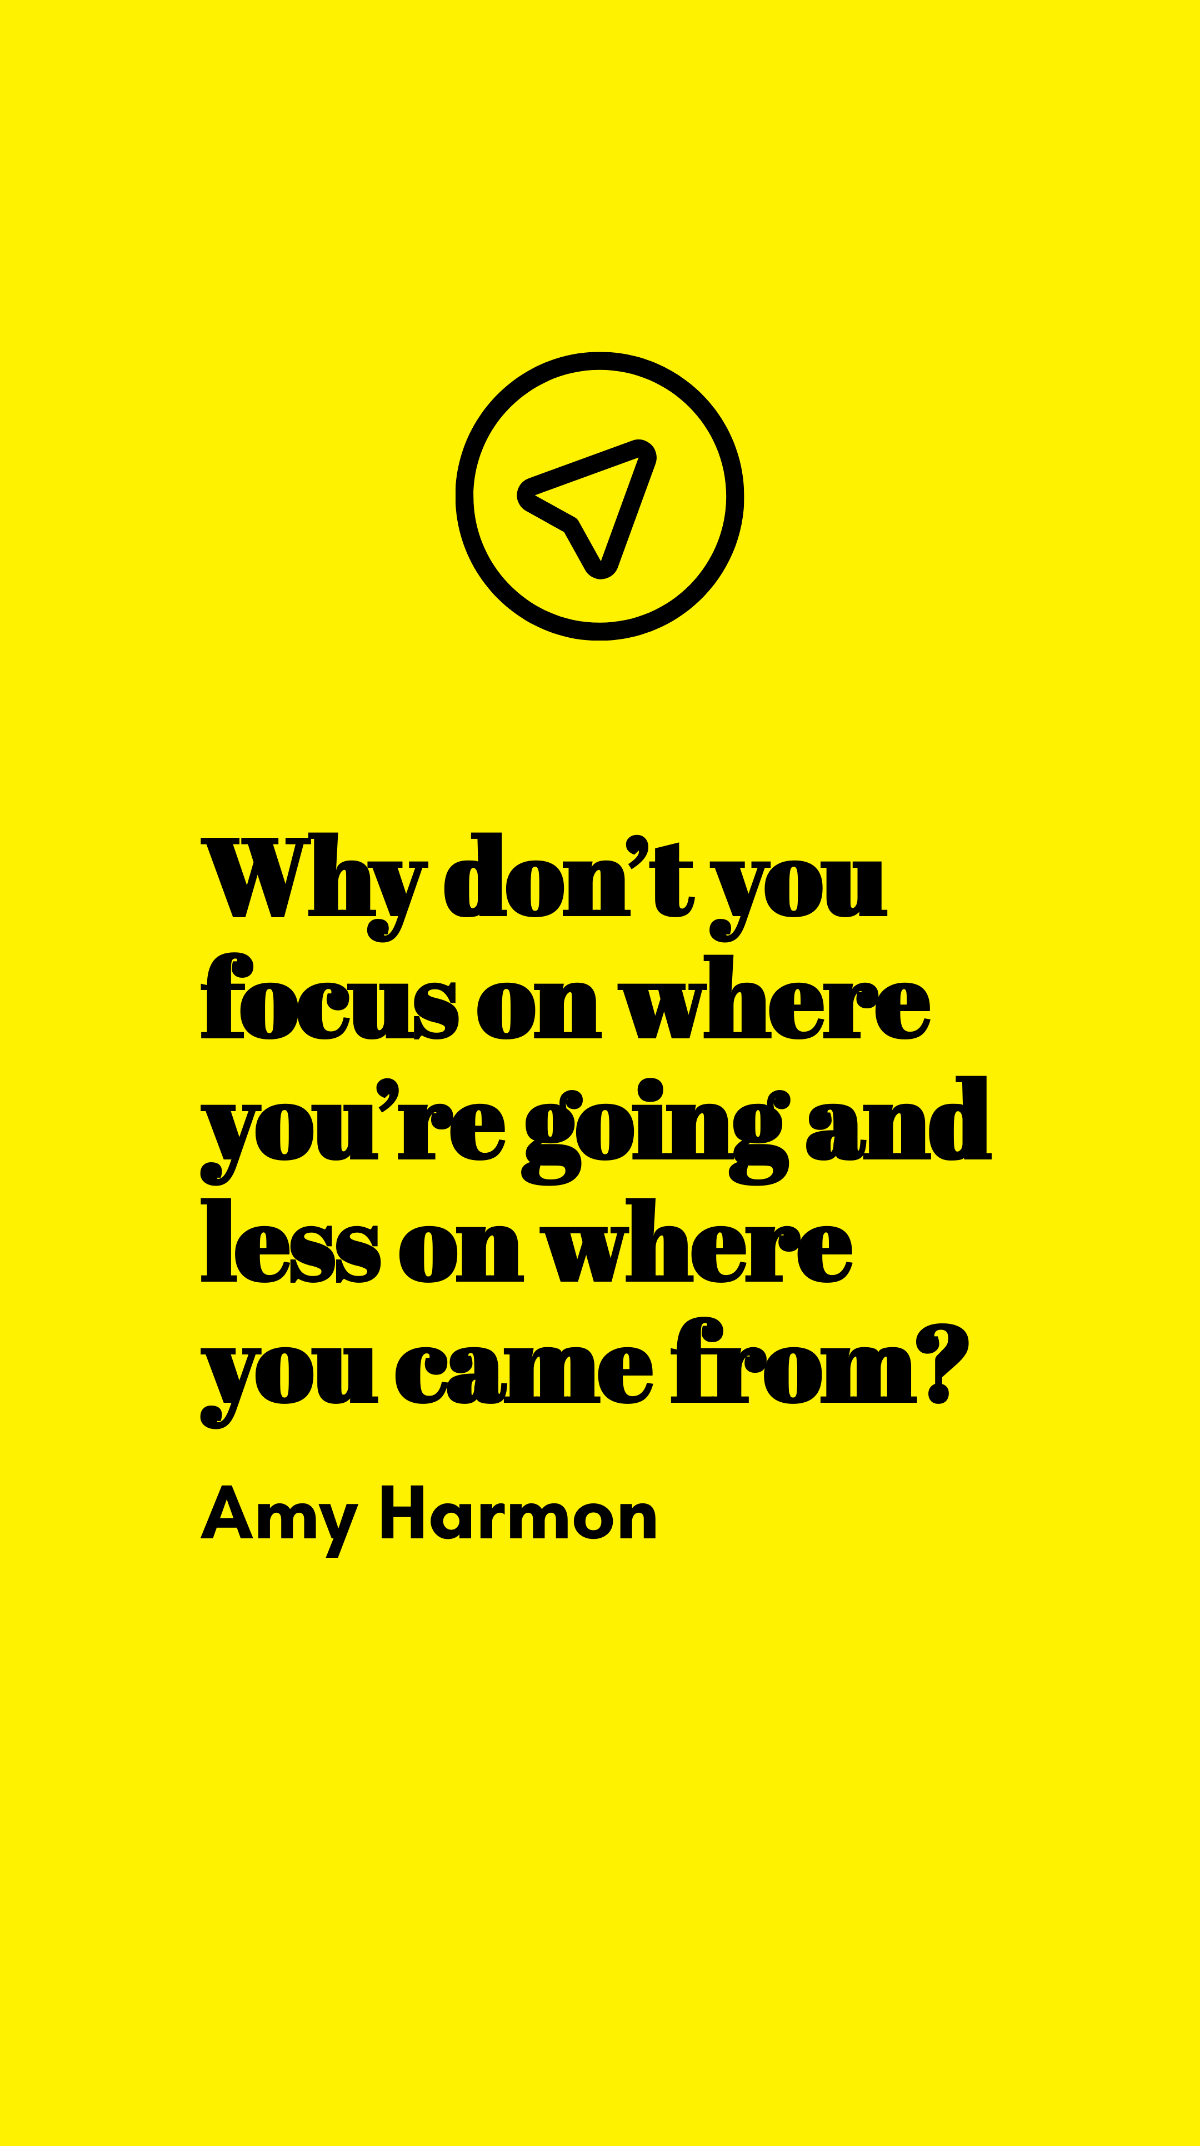 Amy Harmon - Why don’t you focus on where you’re going and less on where you came from?